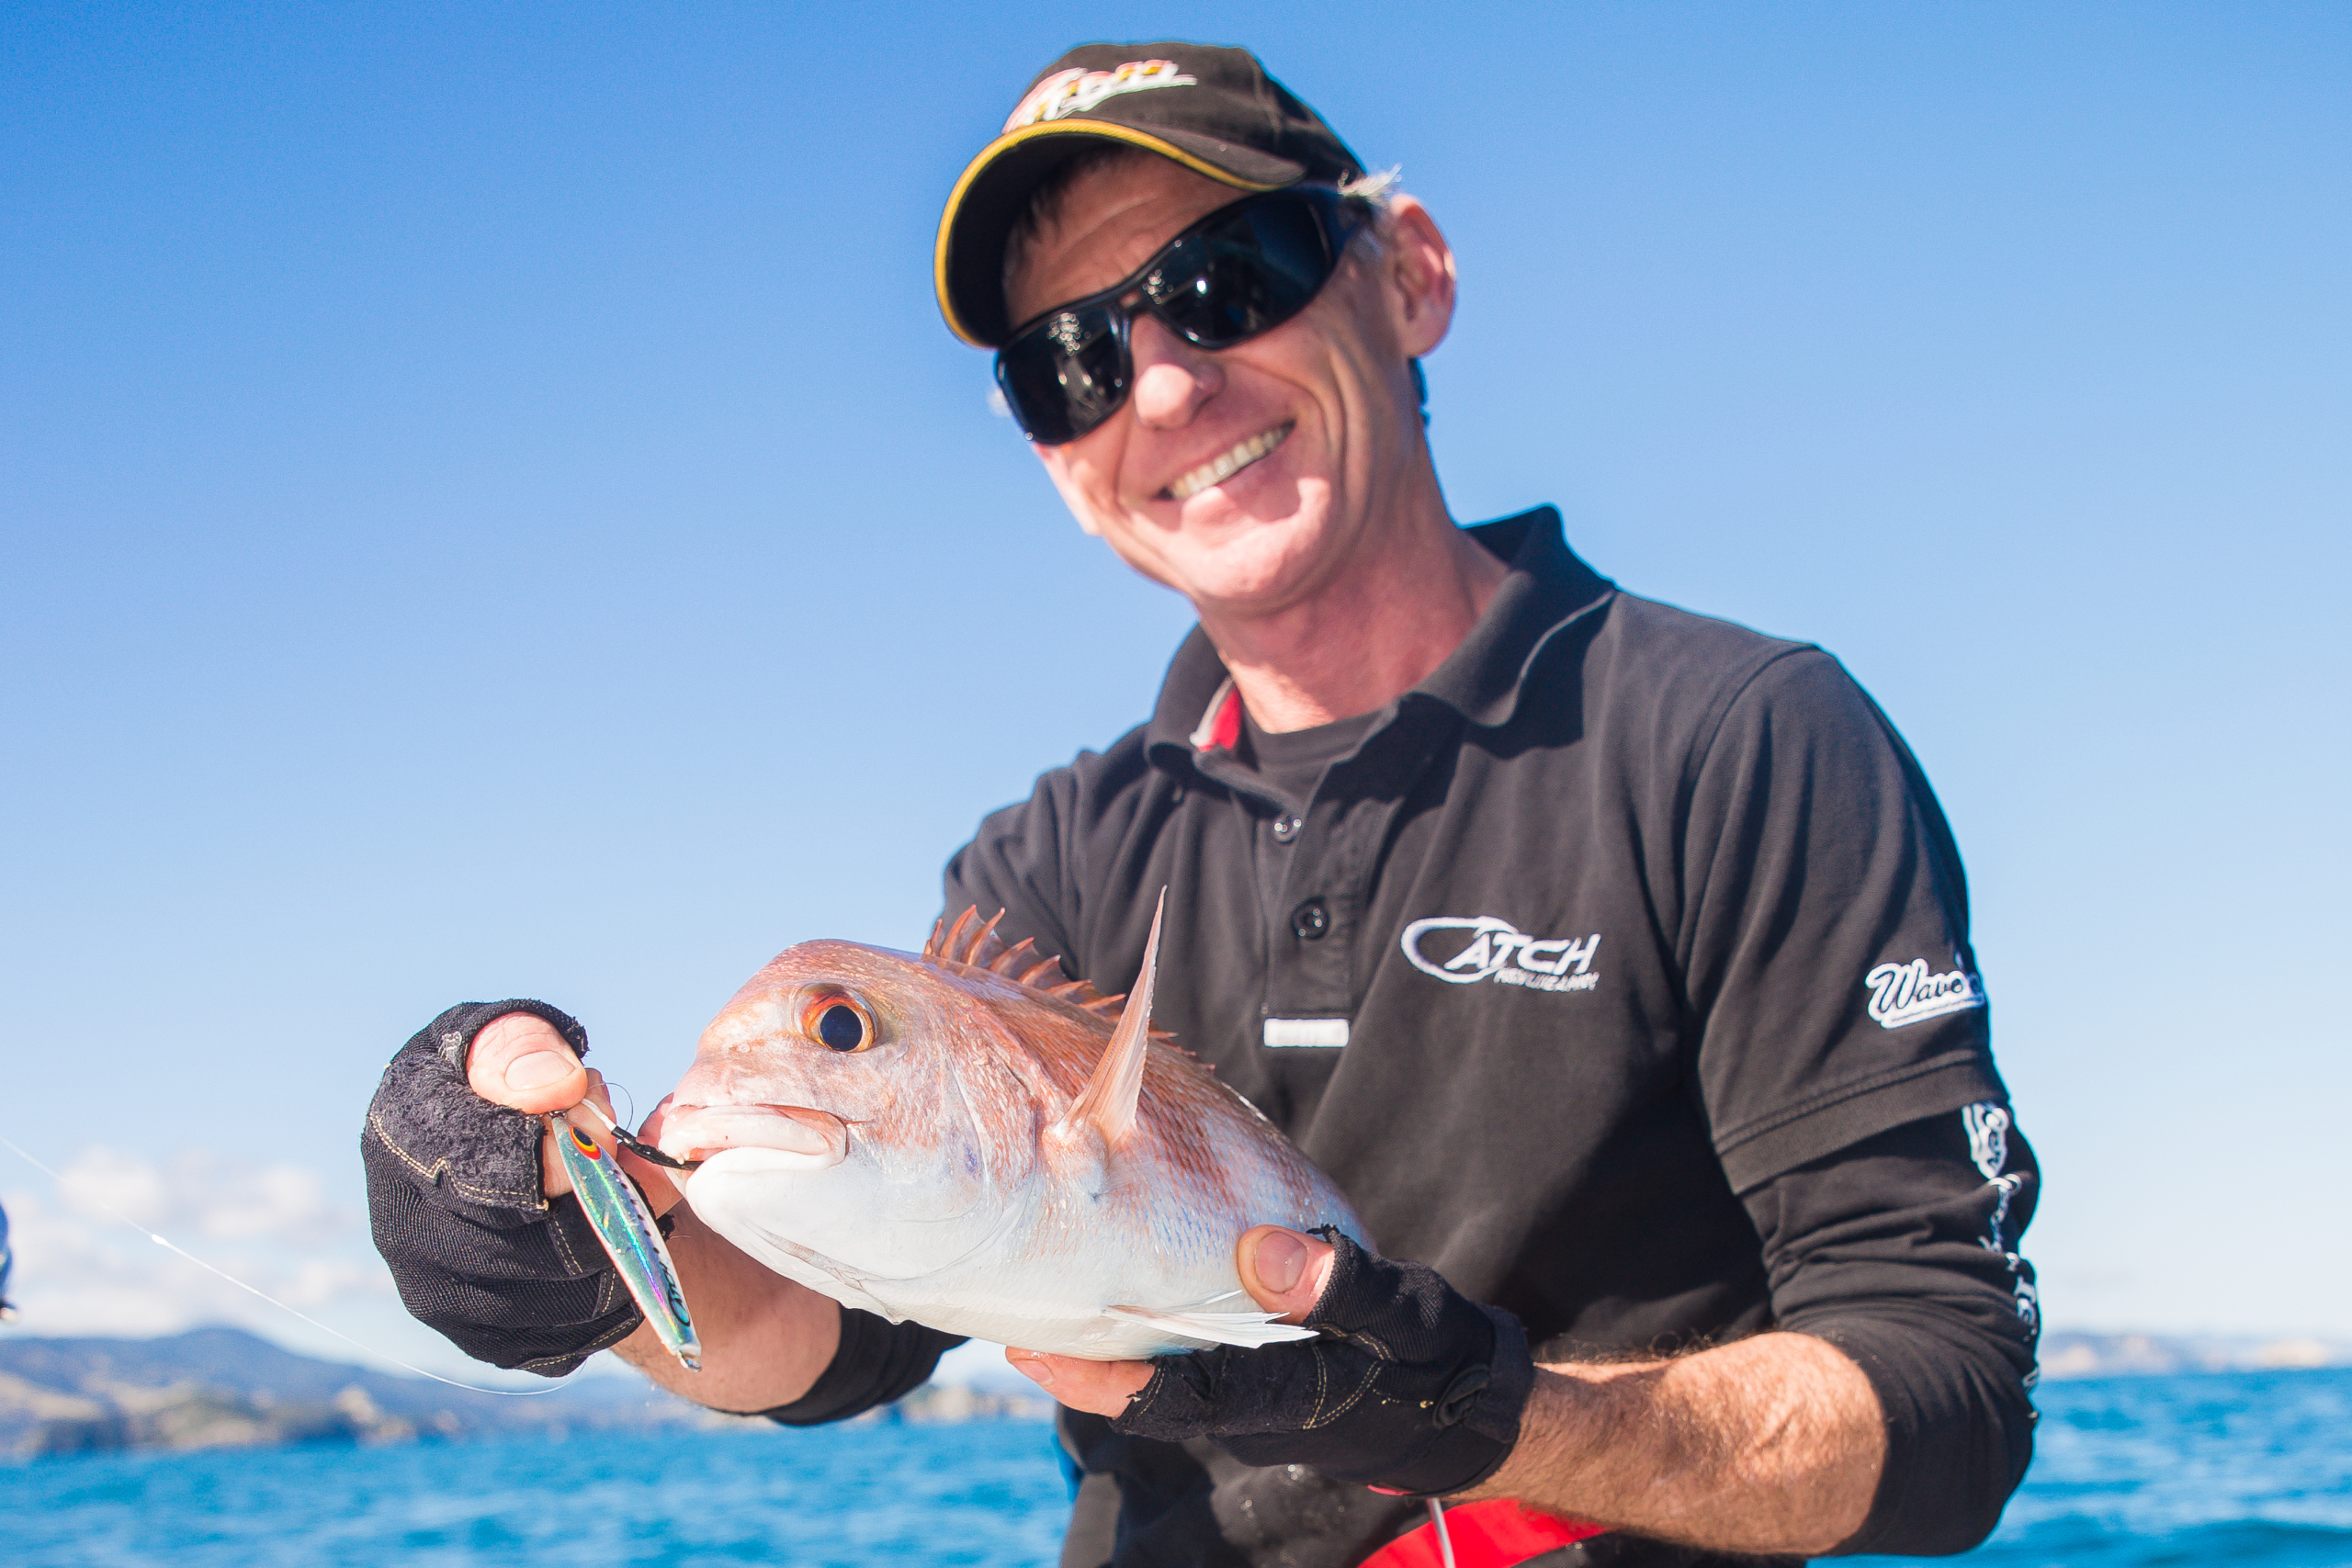 Grant with micro-jig caught snapper